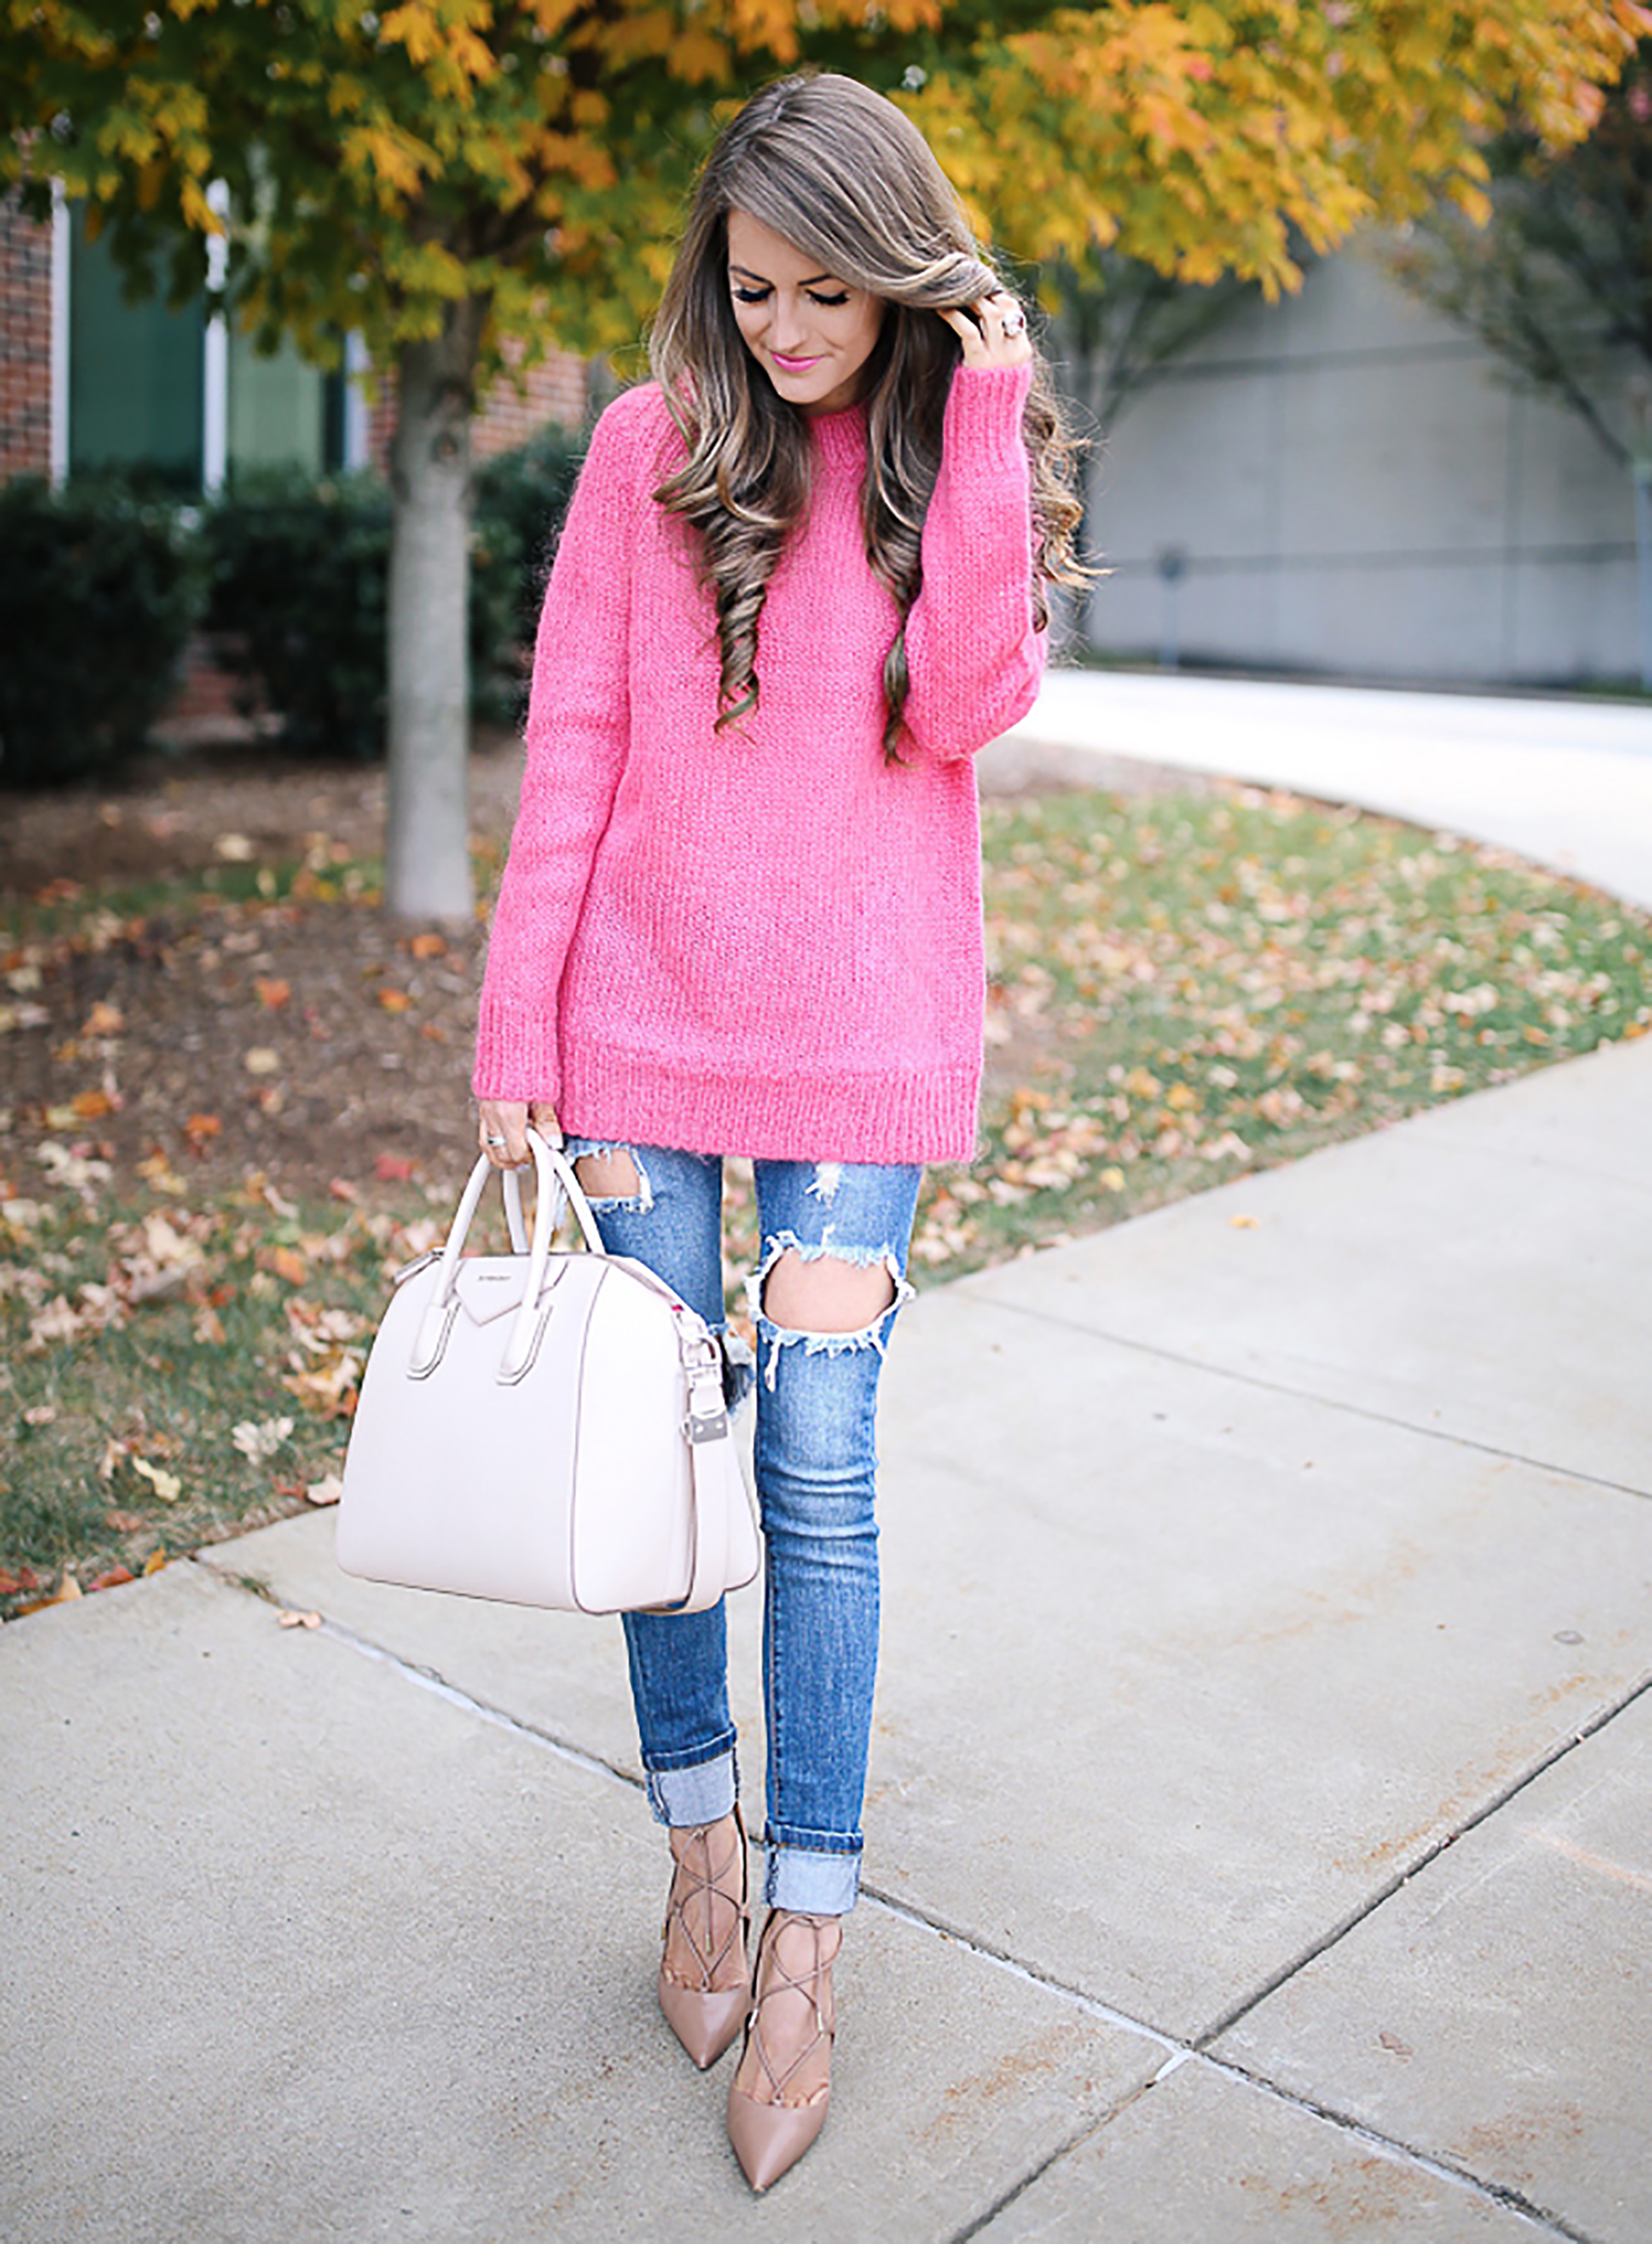 Sydne Style shows pink outfit ideas for fall with fashion blogger southern curls pearls in hot pink sweater